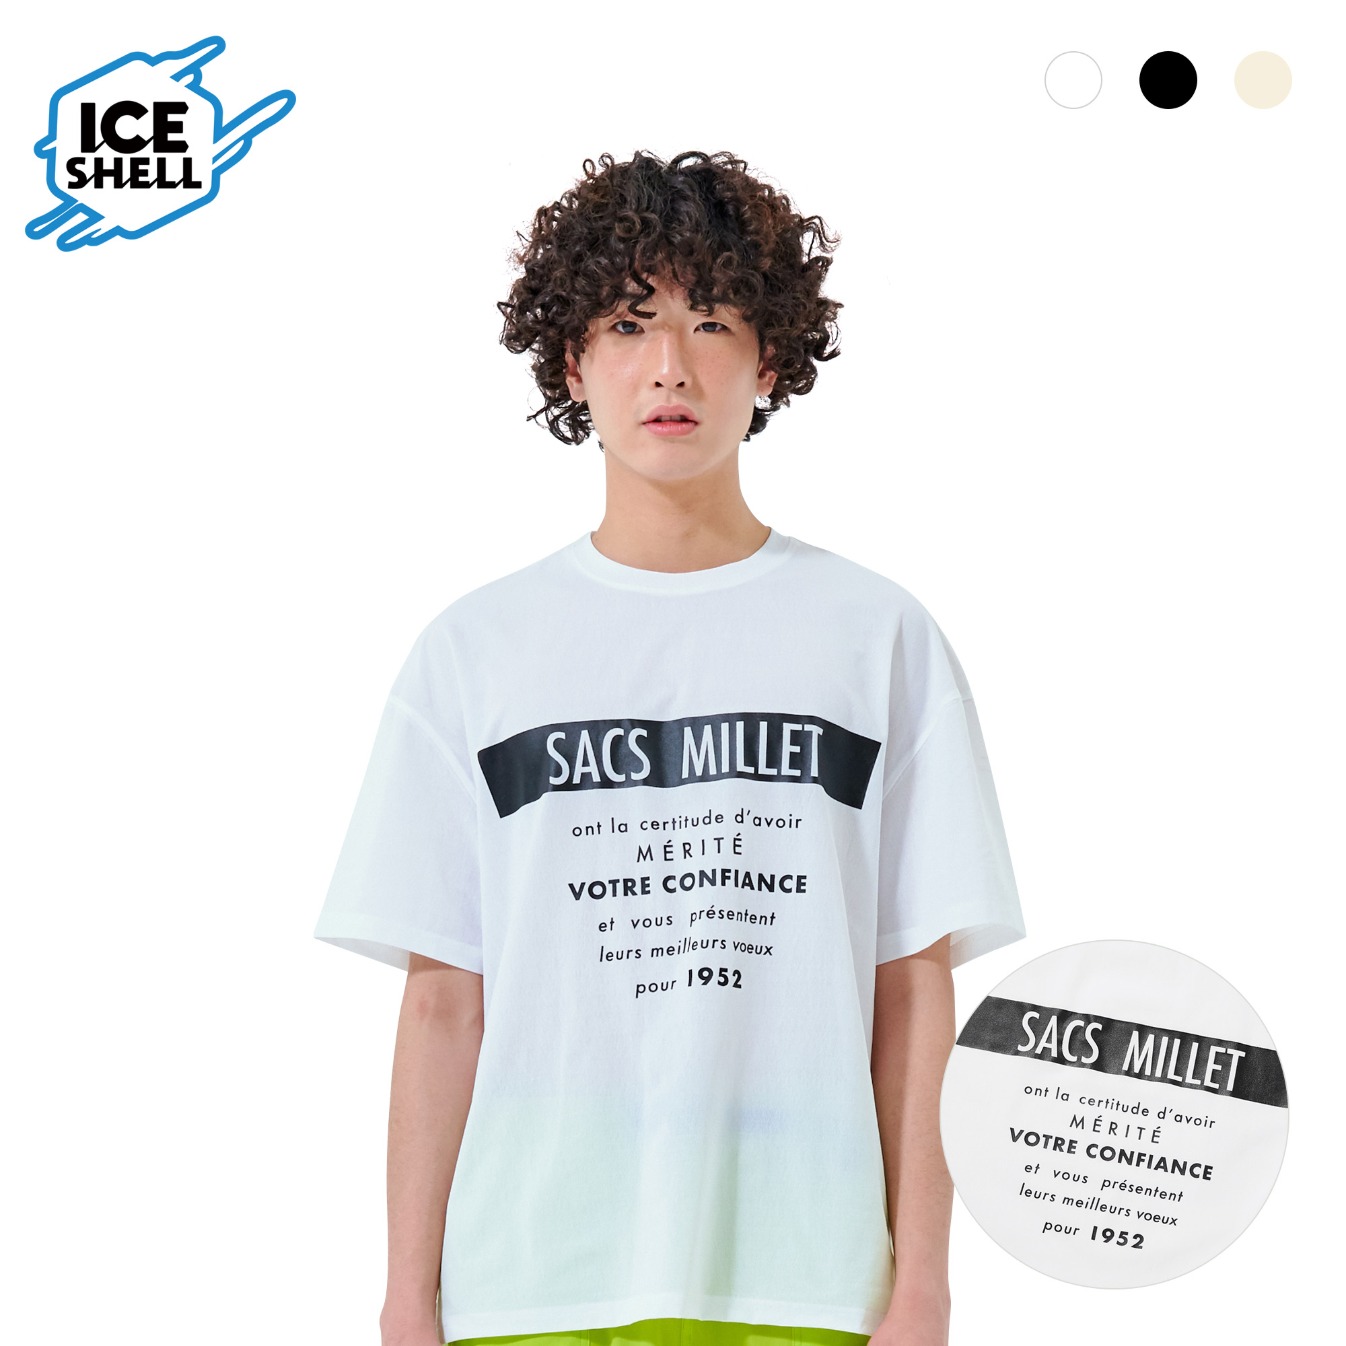 SACS MILLET ICE SHELL T-SHIRTS